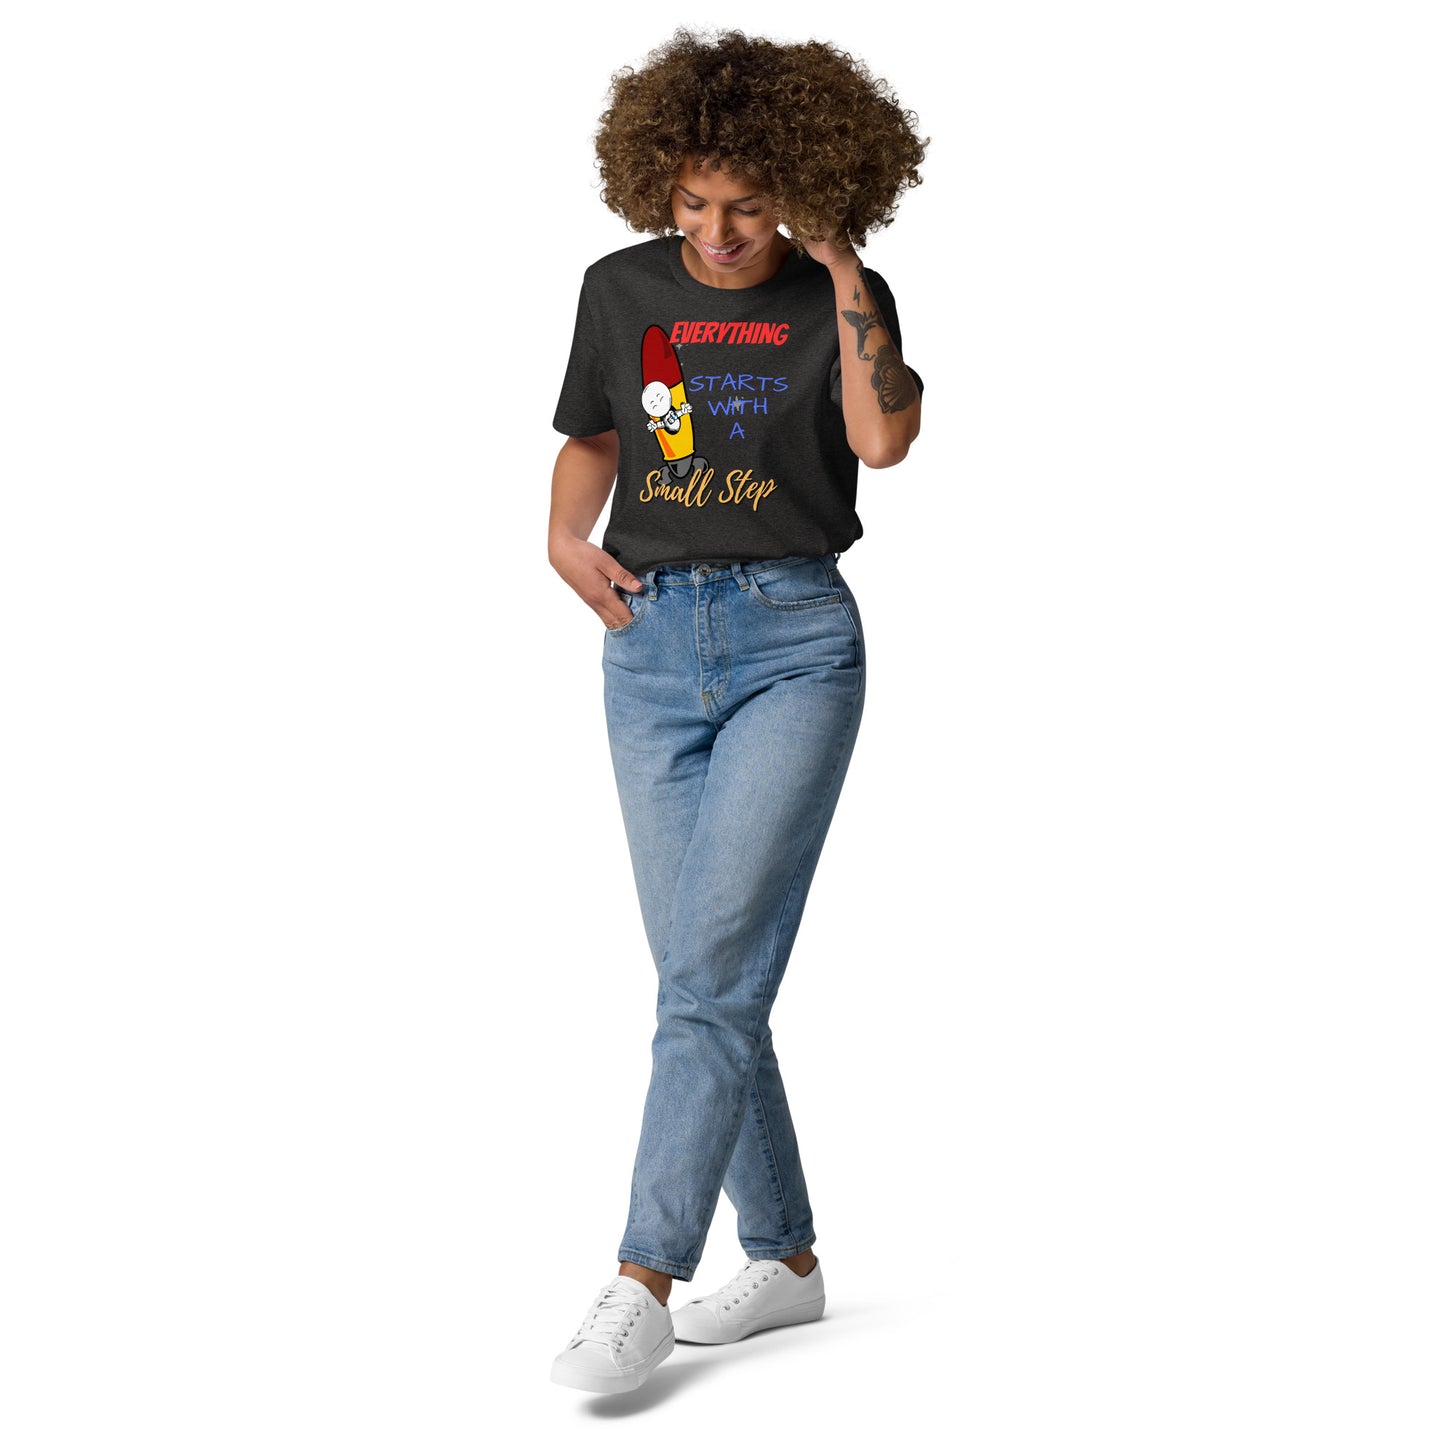 Everything Starts With A Small Step : Unisex organic cotton t-shirt